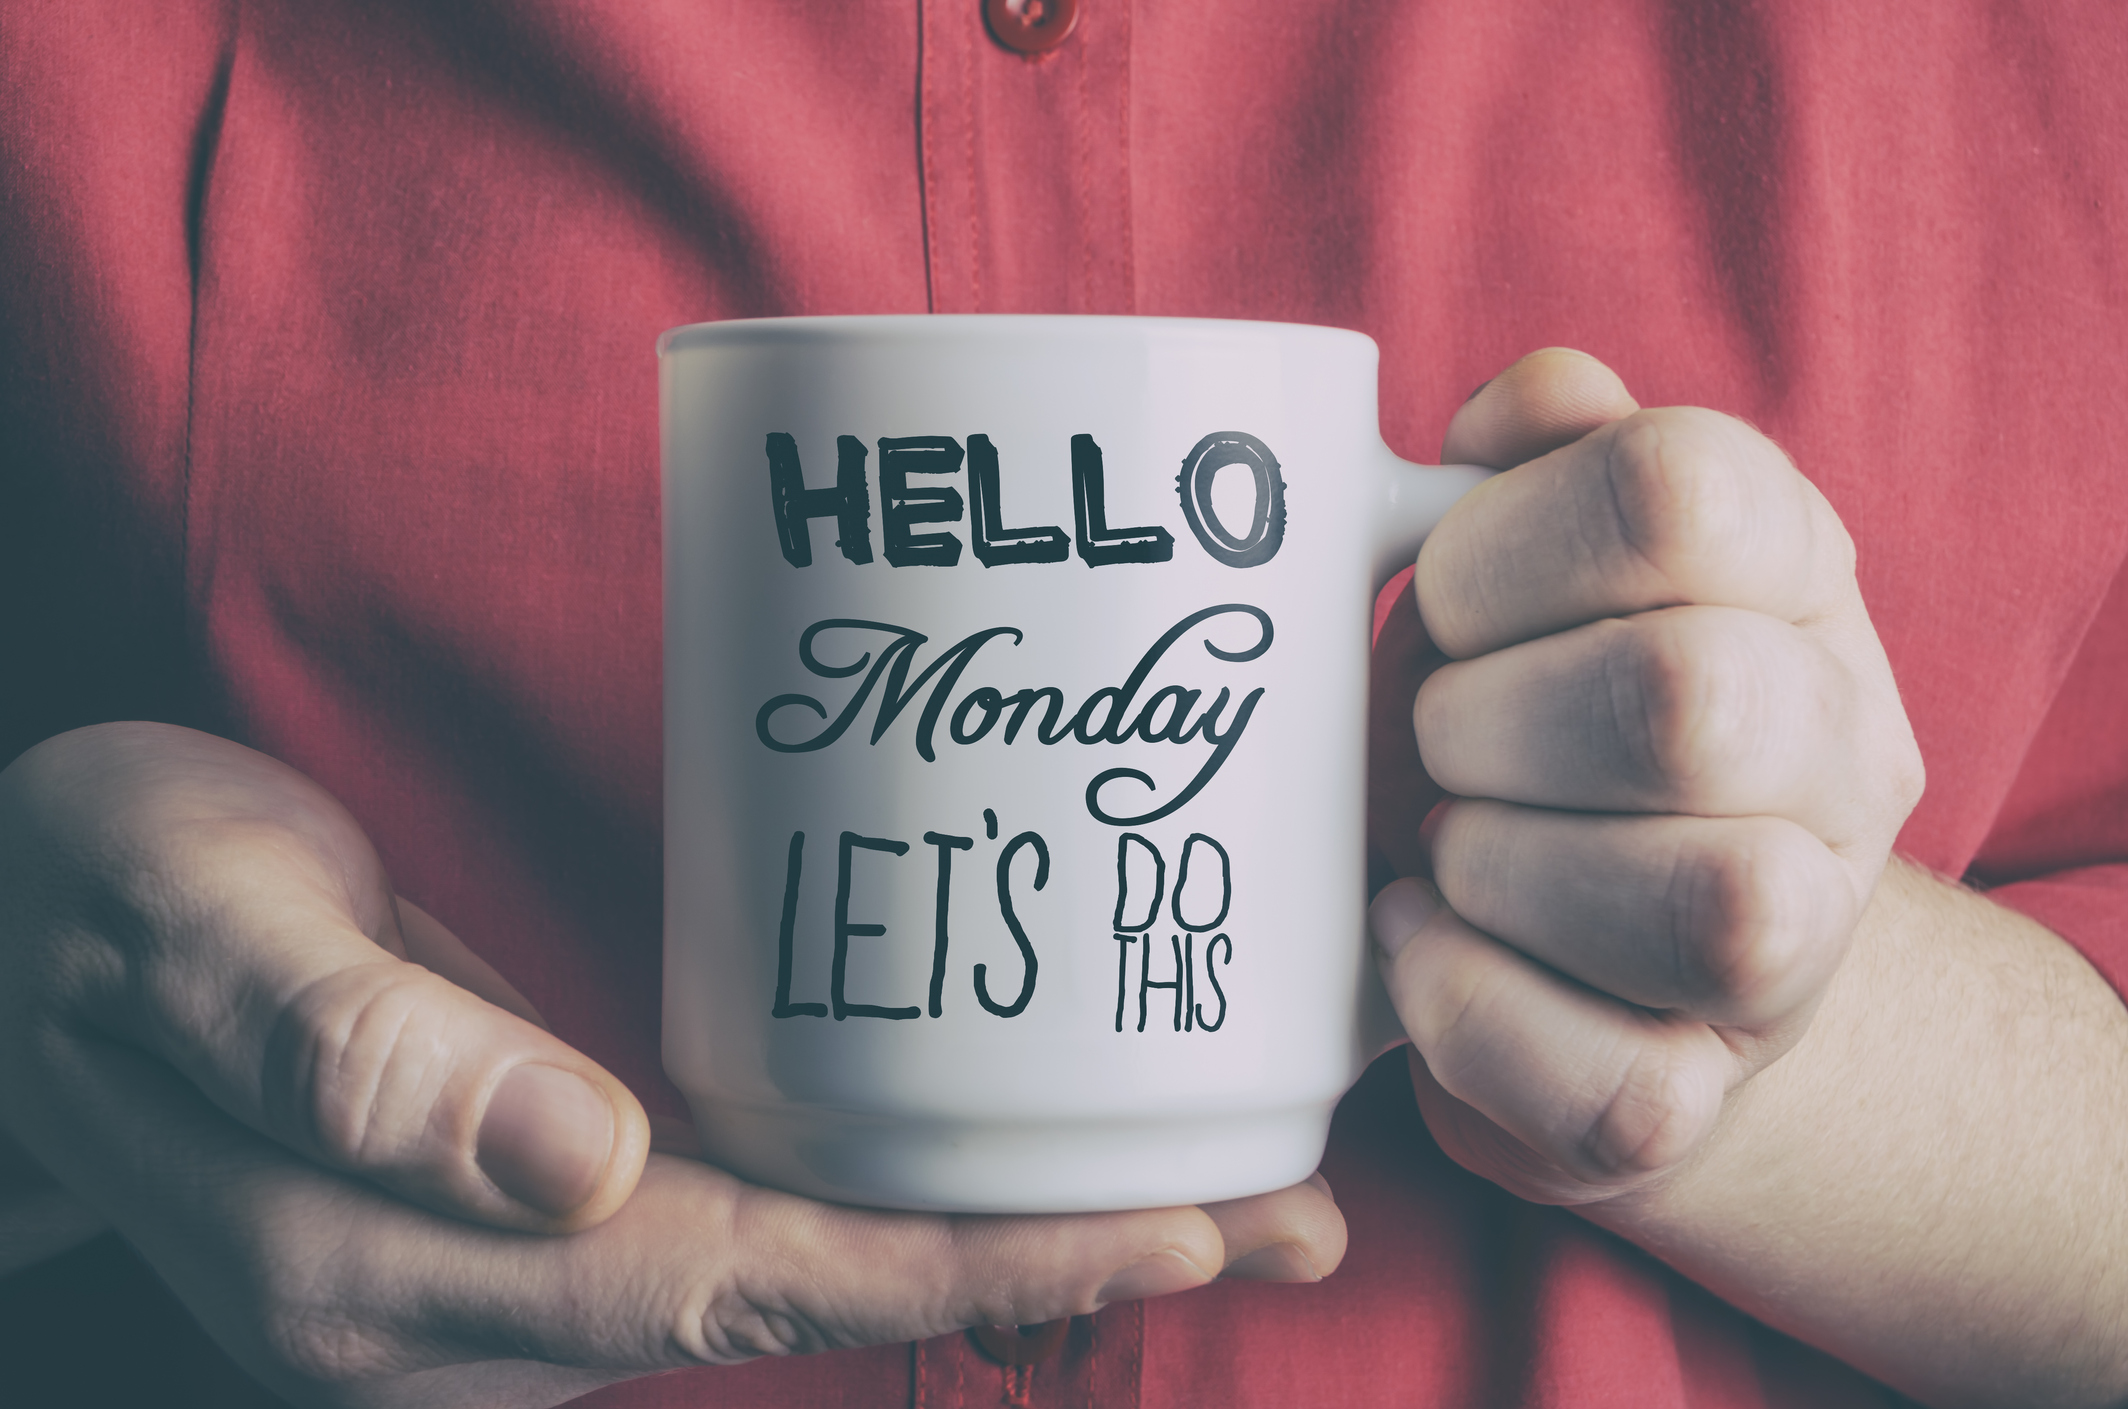 Image of a person holding a cup in his/her hands that says "Hello Monday Let's Do This!"